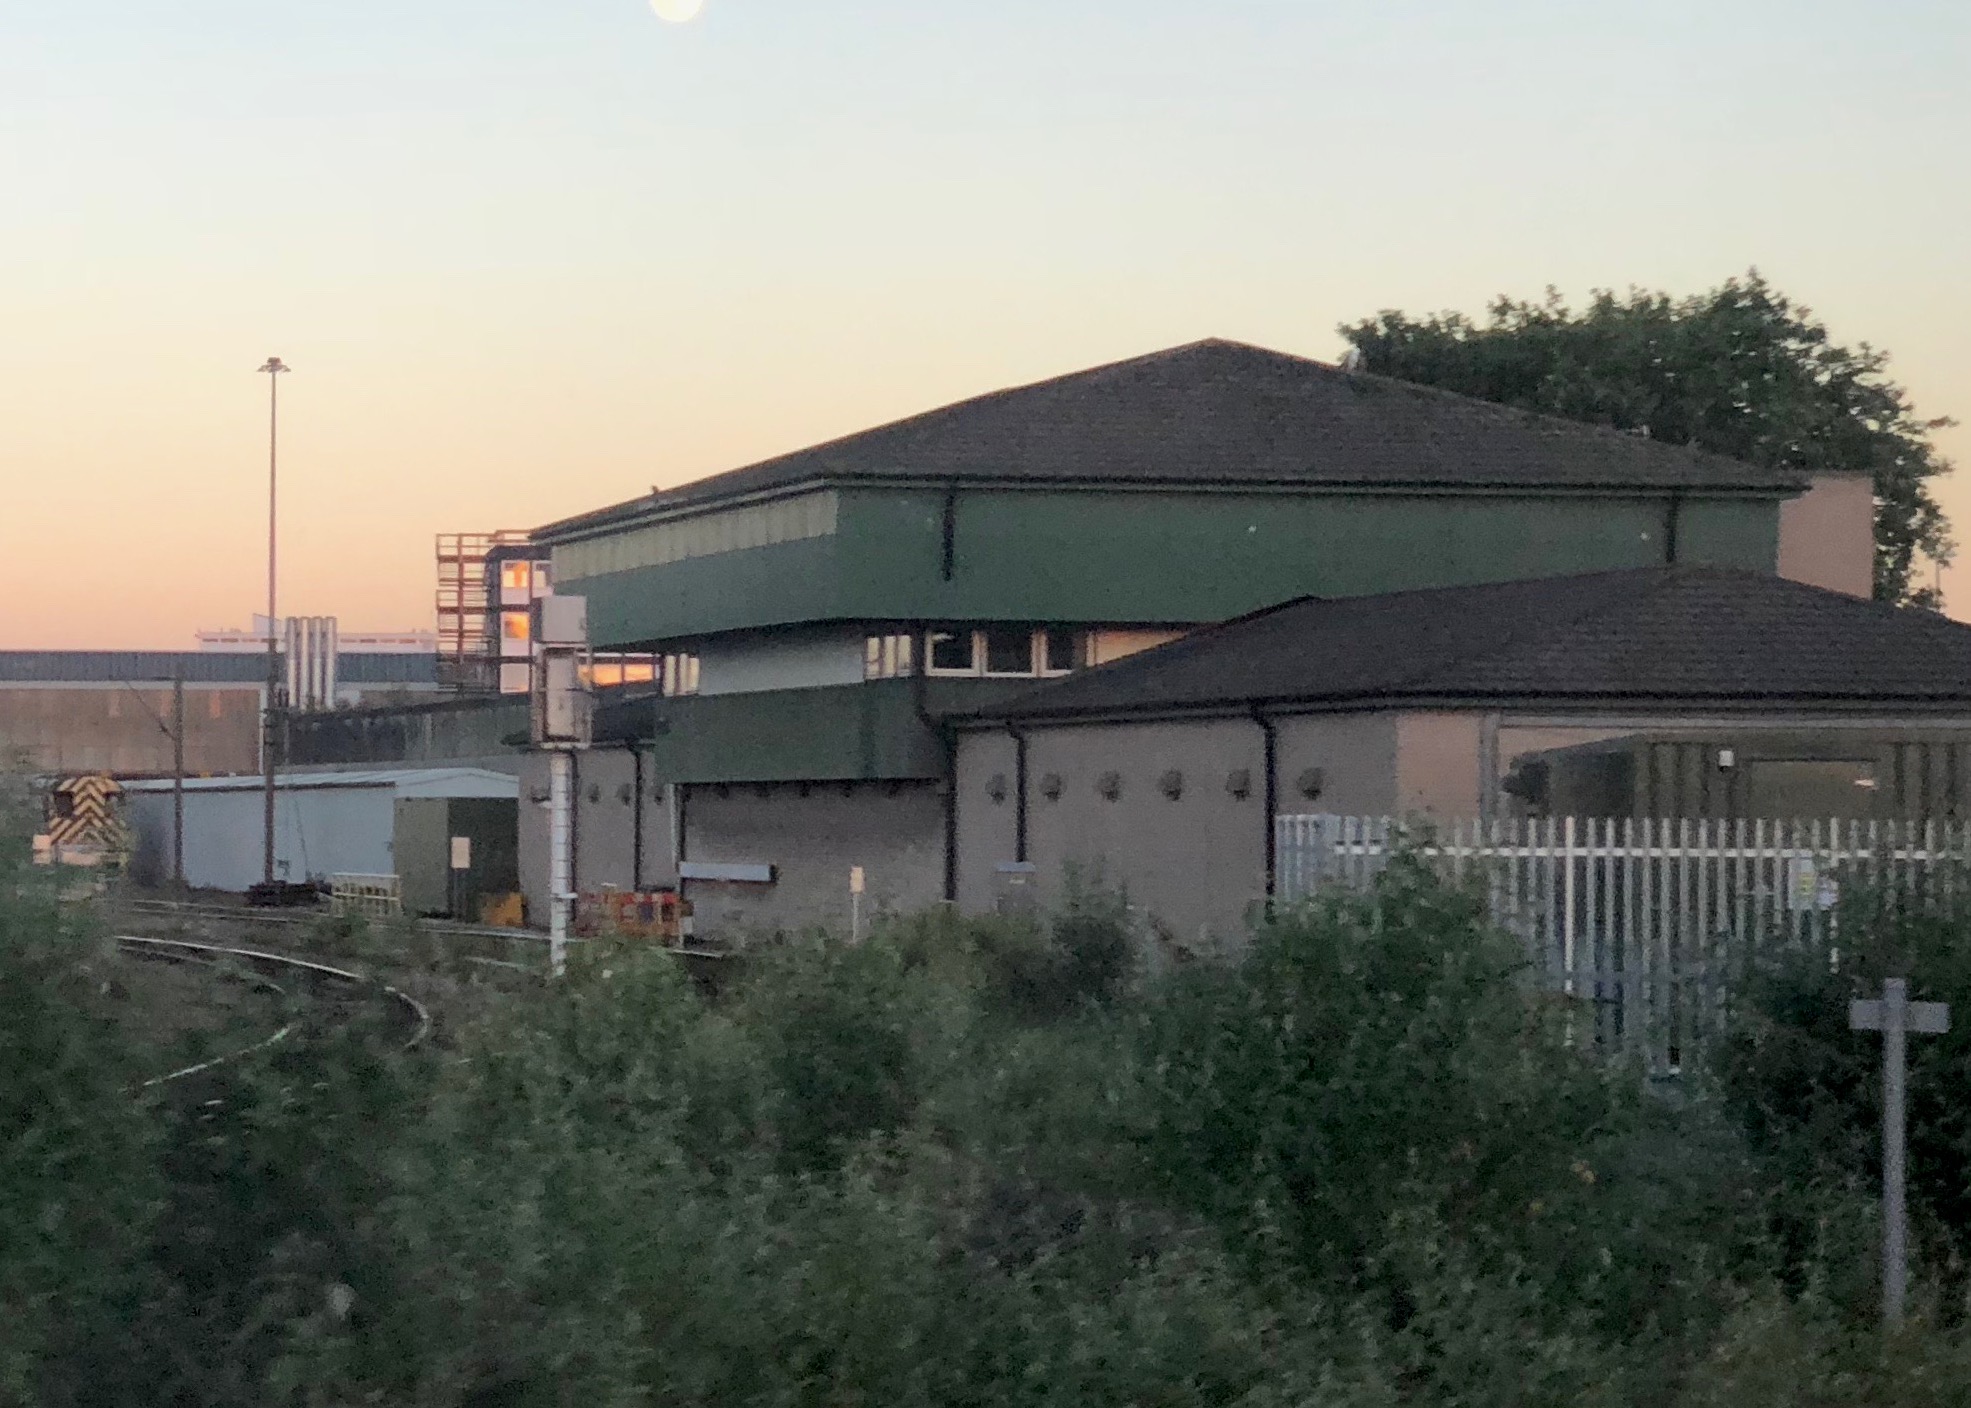 Derby Power Signal Box snapped from a passing train on 26th June 2018